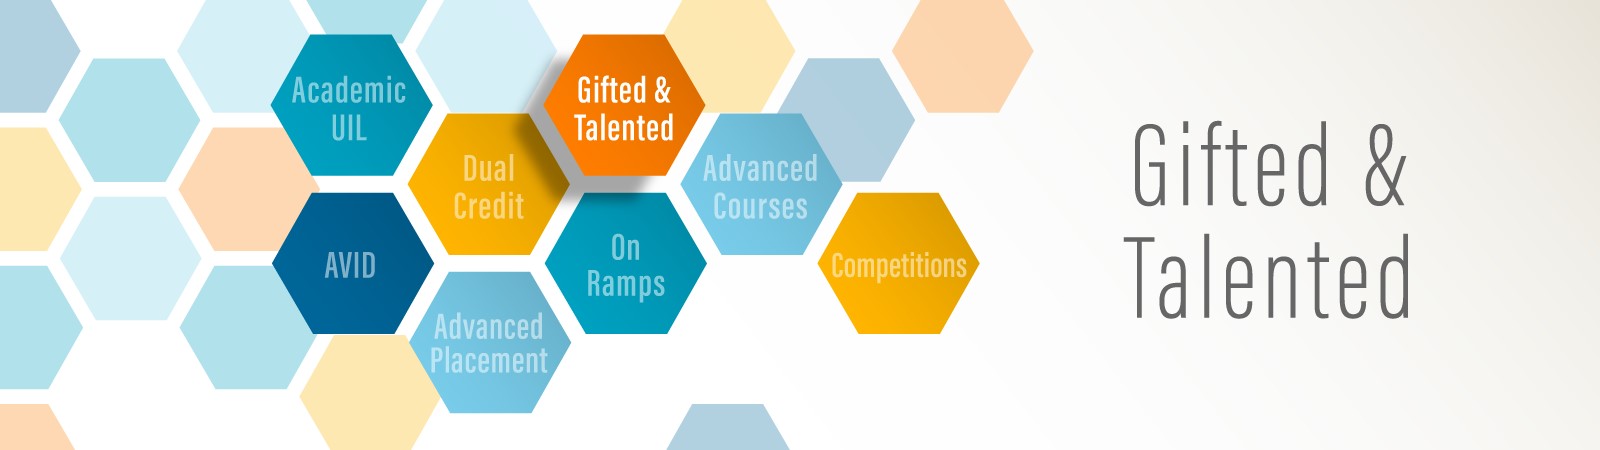 Gifted & Talented Banner 